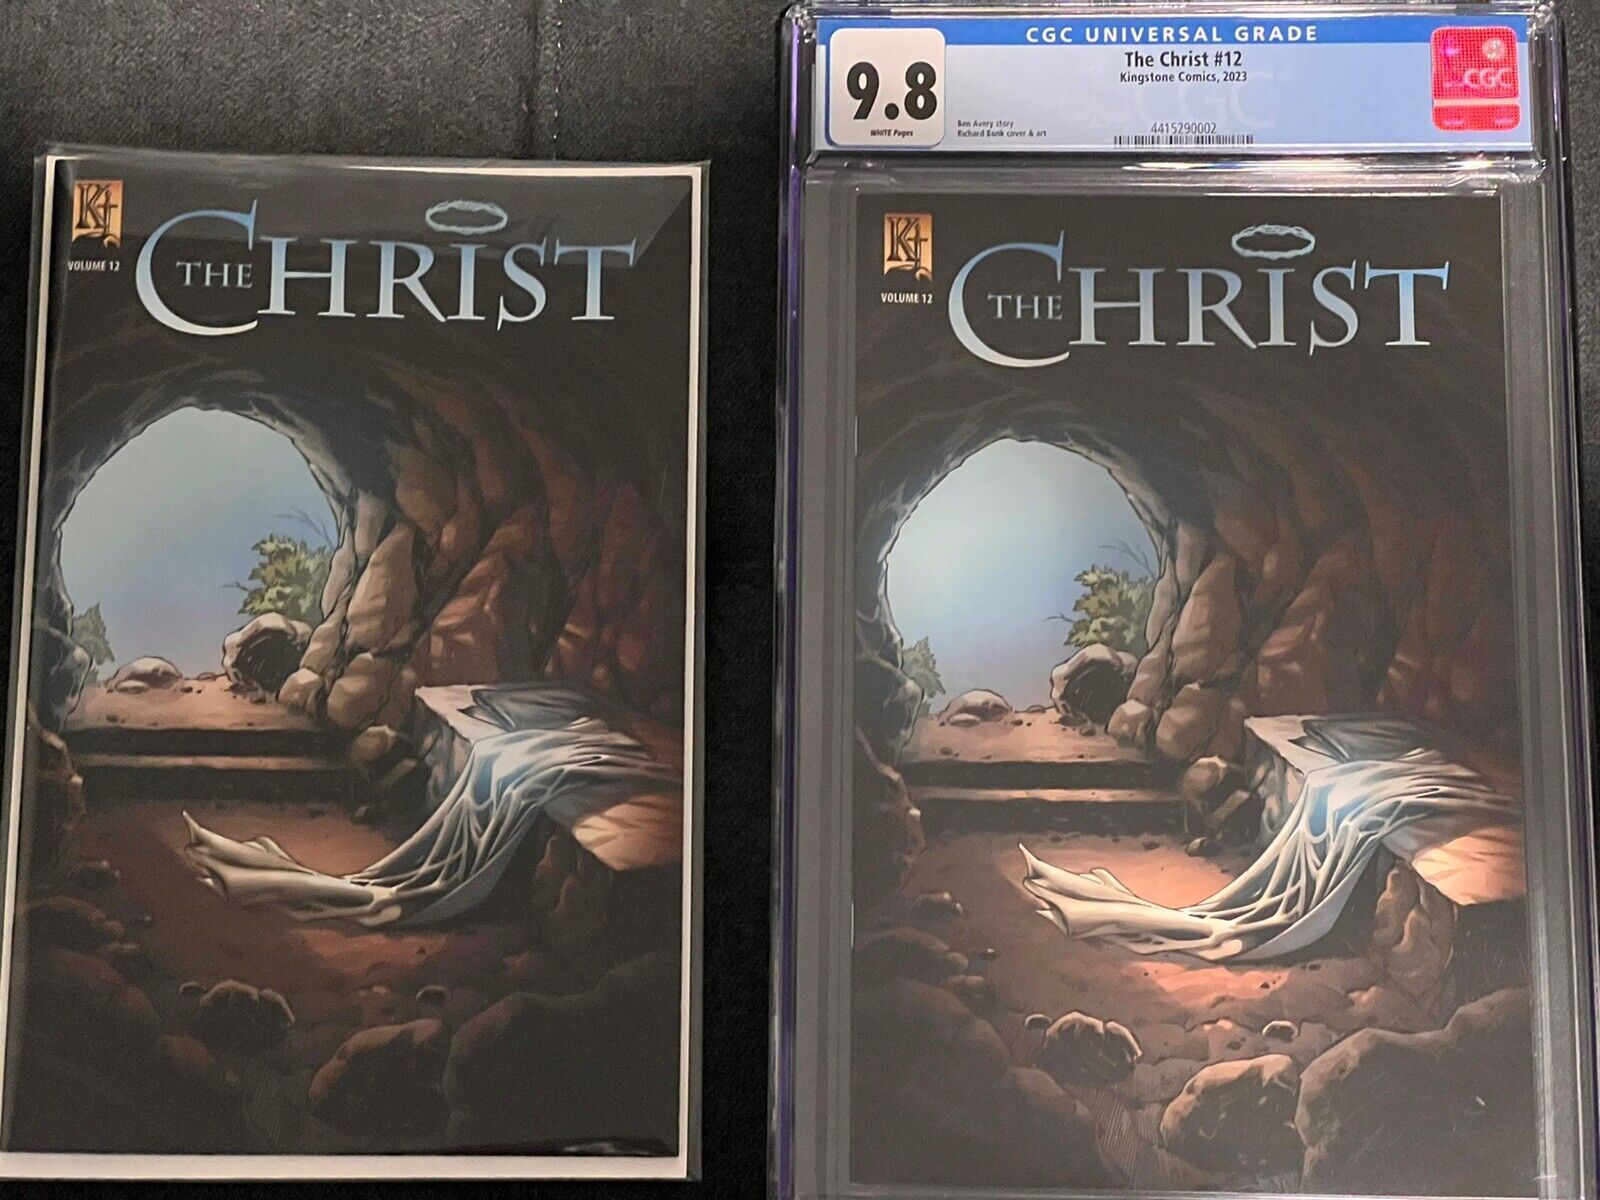 The Christ Volume 12 Kingstone Comics Both CGC 9.8 And Raw Both In This BIN